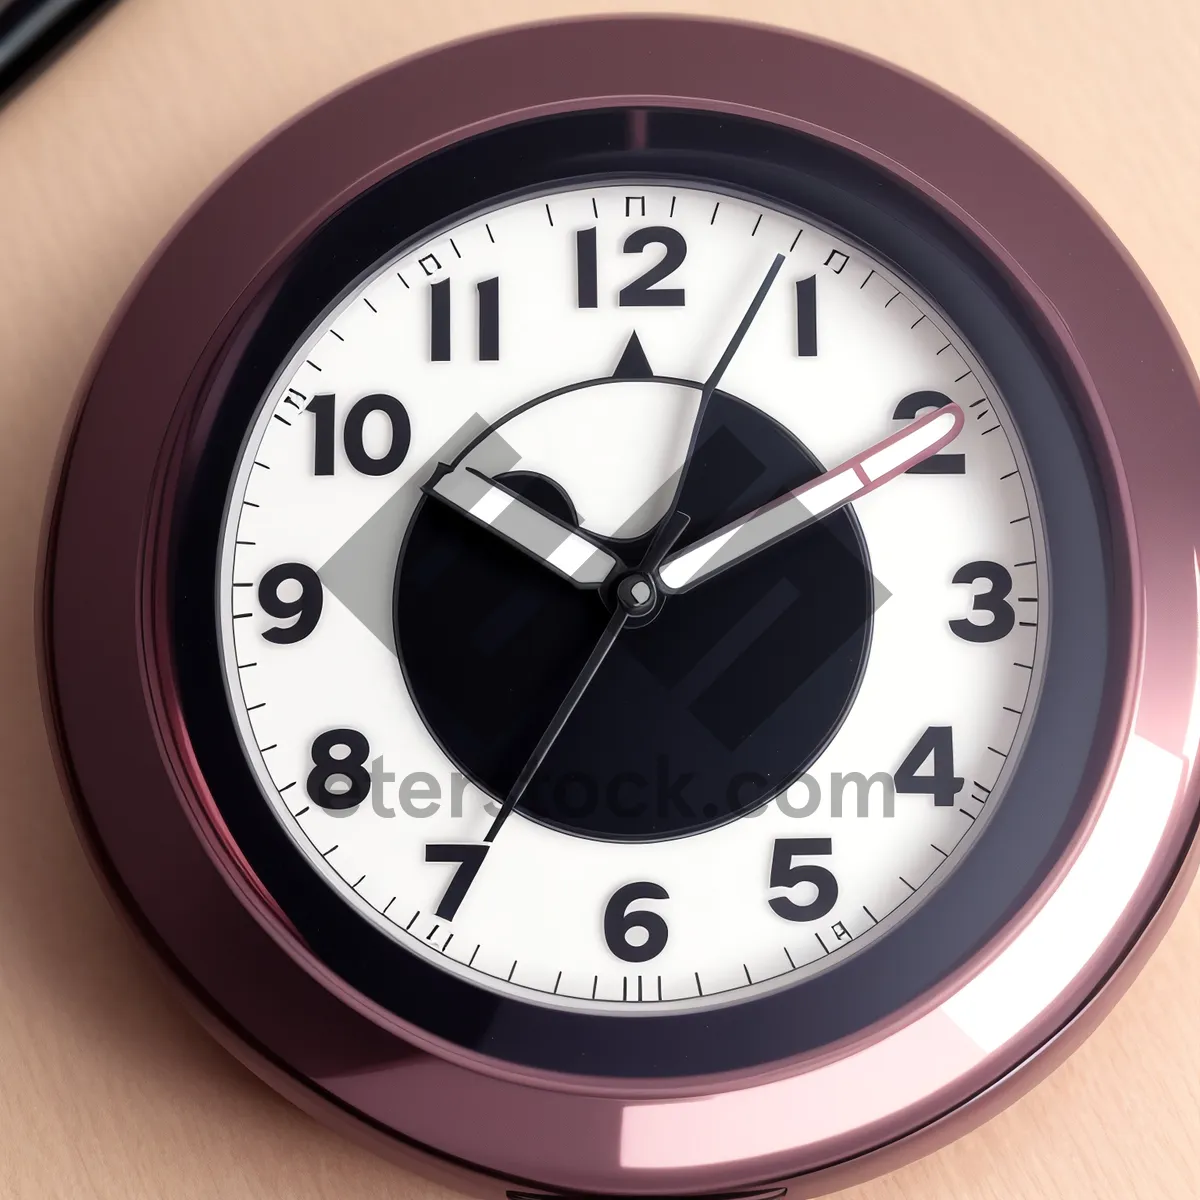 Picture of Time Countdown: Analog Wall Clock with Alarm